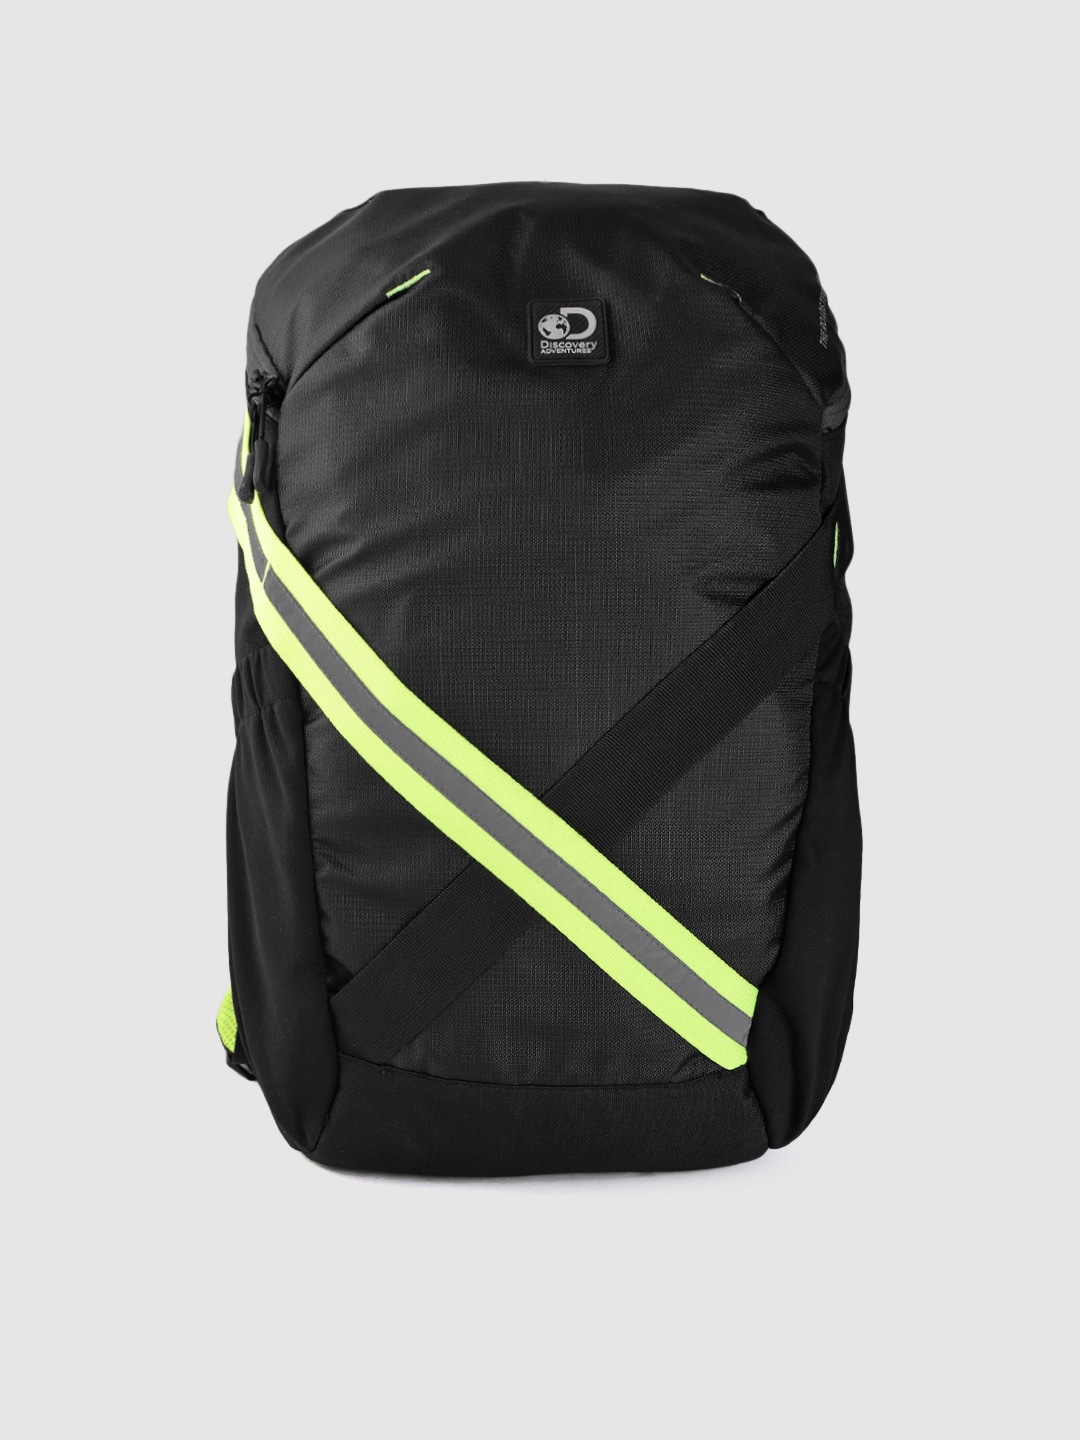 Accessories Backpacks | The Roadster Lifestyle Co x Discovery Adventures Unisex Black & Yellow 16 Inch Laptop Backpack - XY00546